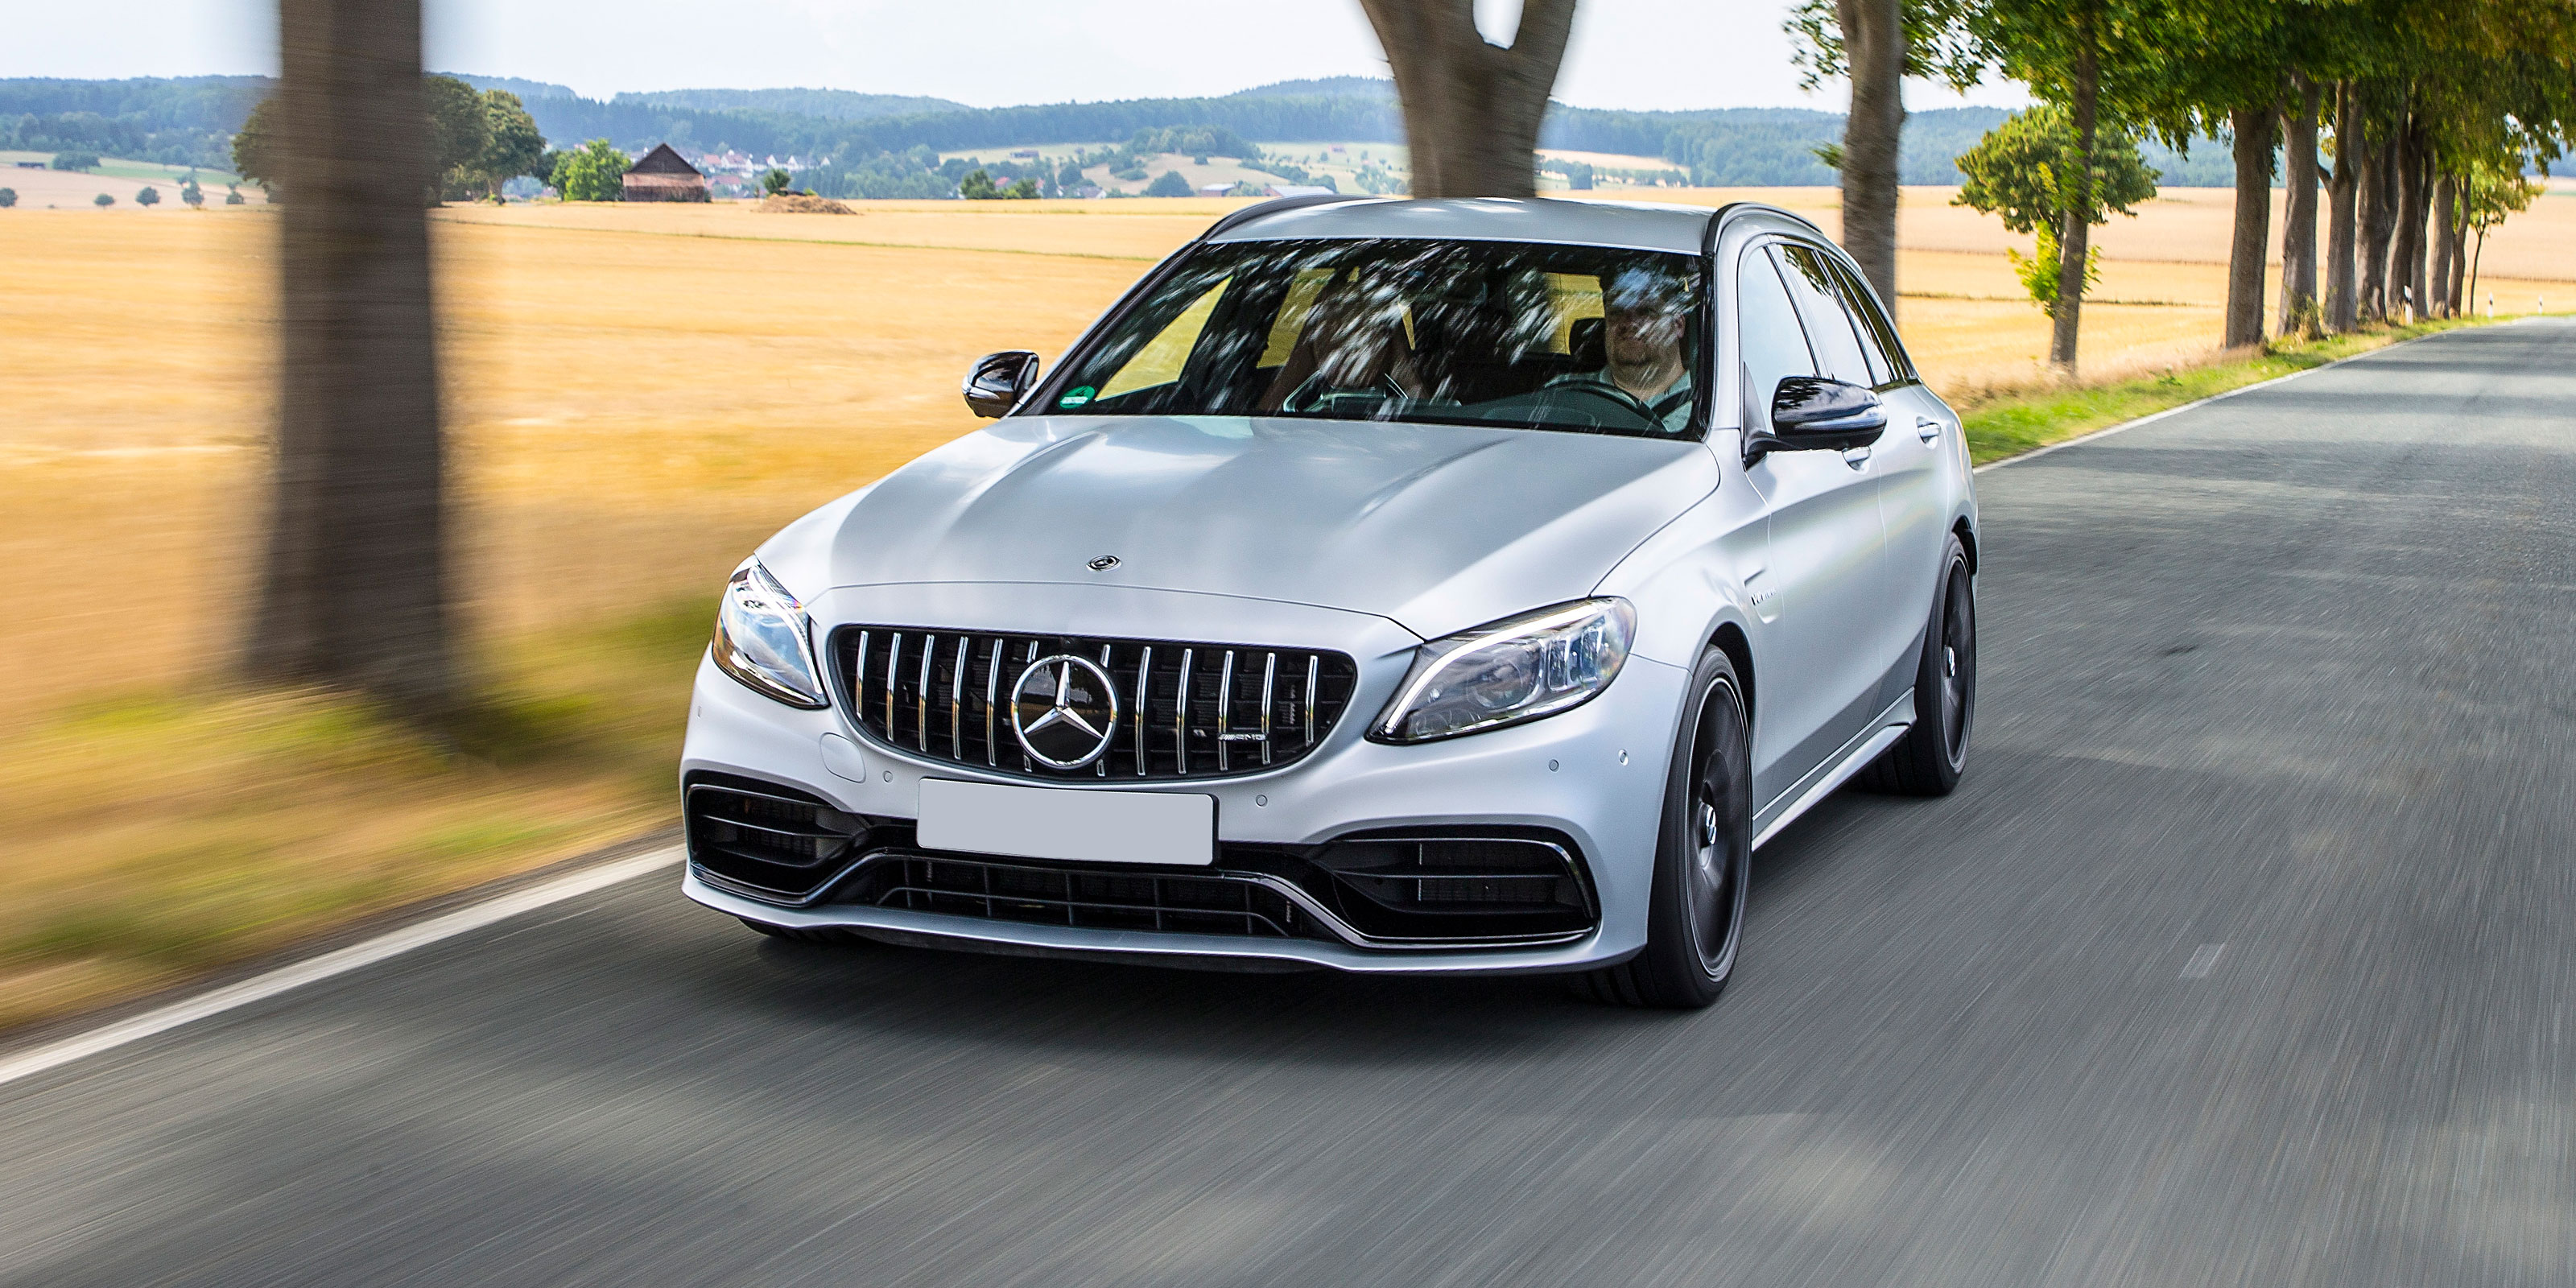 Mercedes Amg C63 Estate Review 21 Carwow